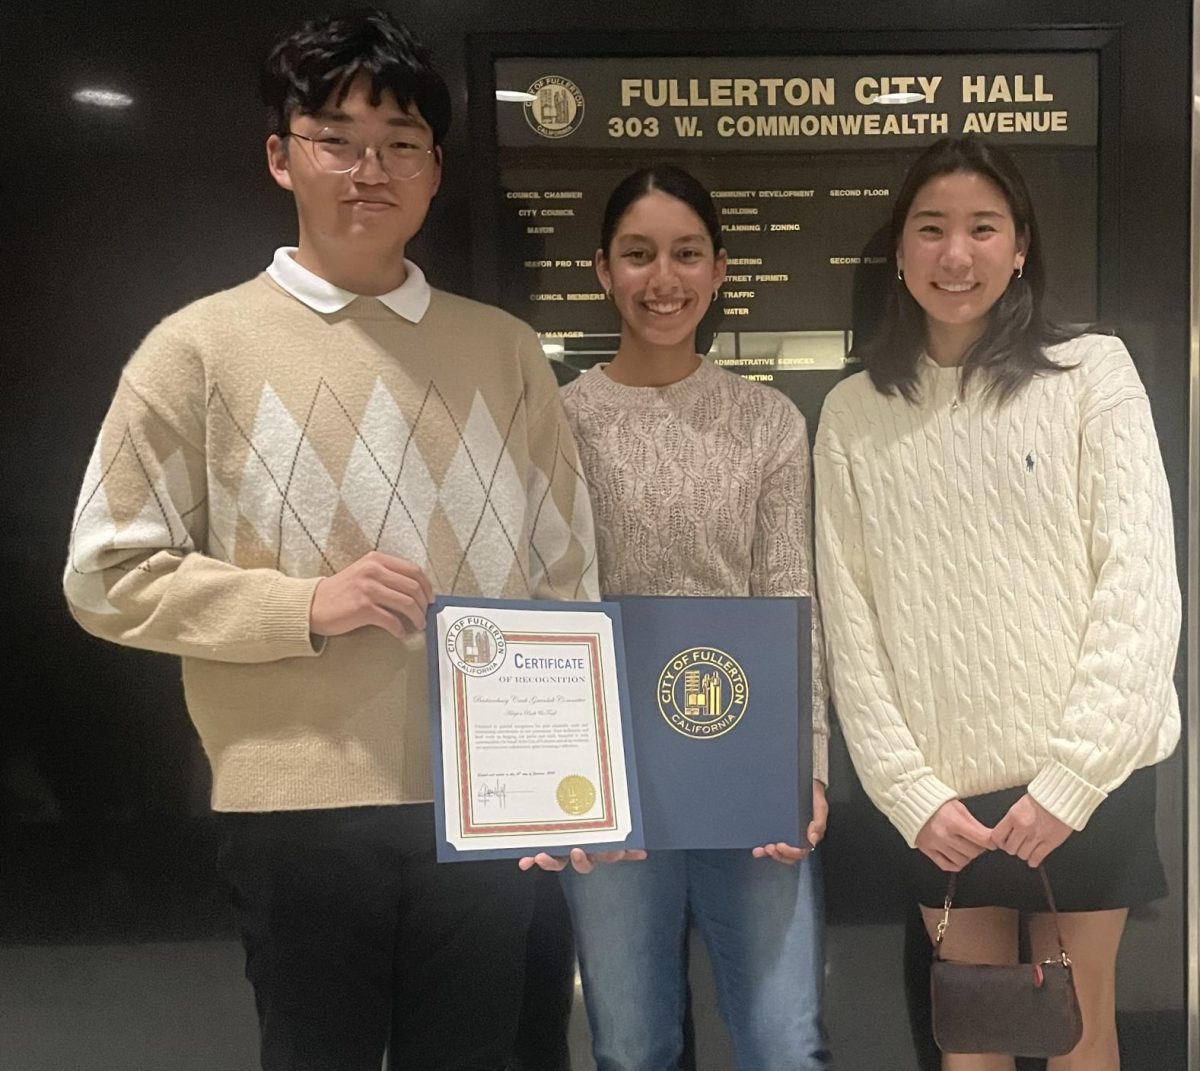 Girls tennis player junior Daniela Borruel (center) received her certificate of recognition alongside her two Sunny Hills classmates, who were also in attendance to receive their own certificates for being Adopt-A-Park volunteers, from the Fullerton City Council in City Hall on Tuesday, Jan. 16.